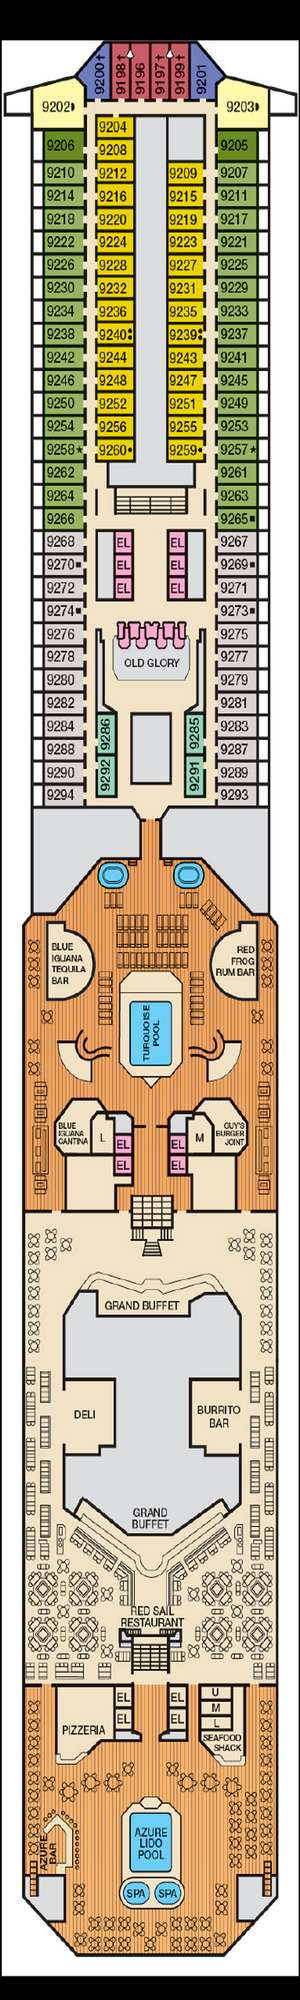 Deck plan for Carnival Glory